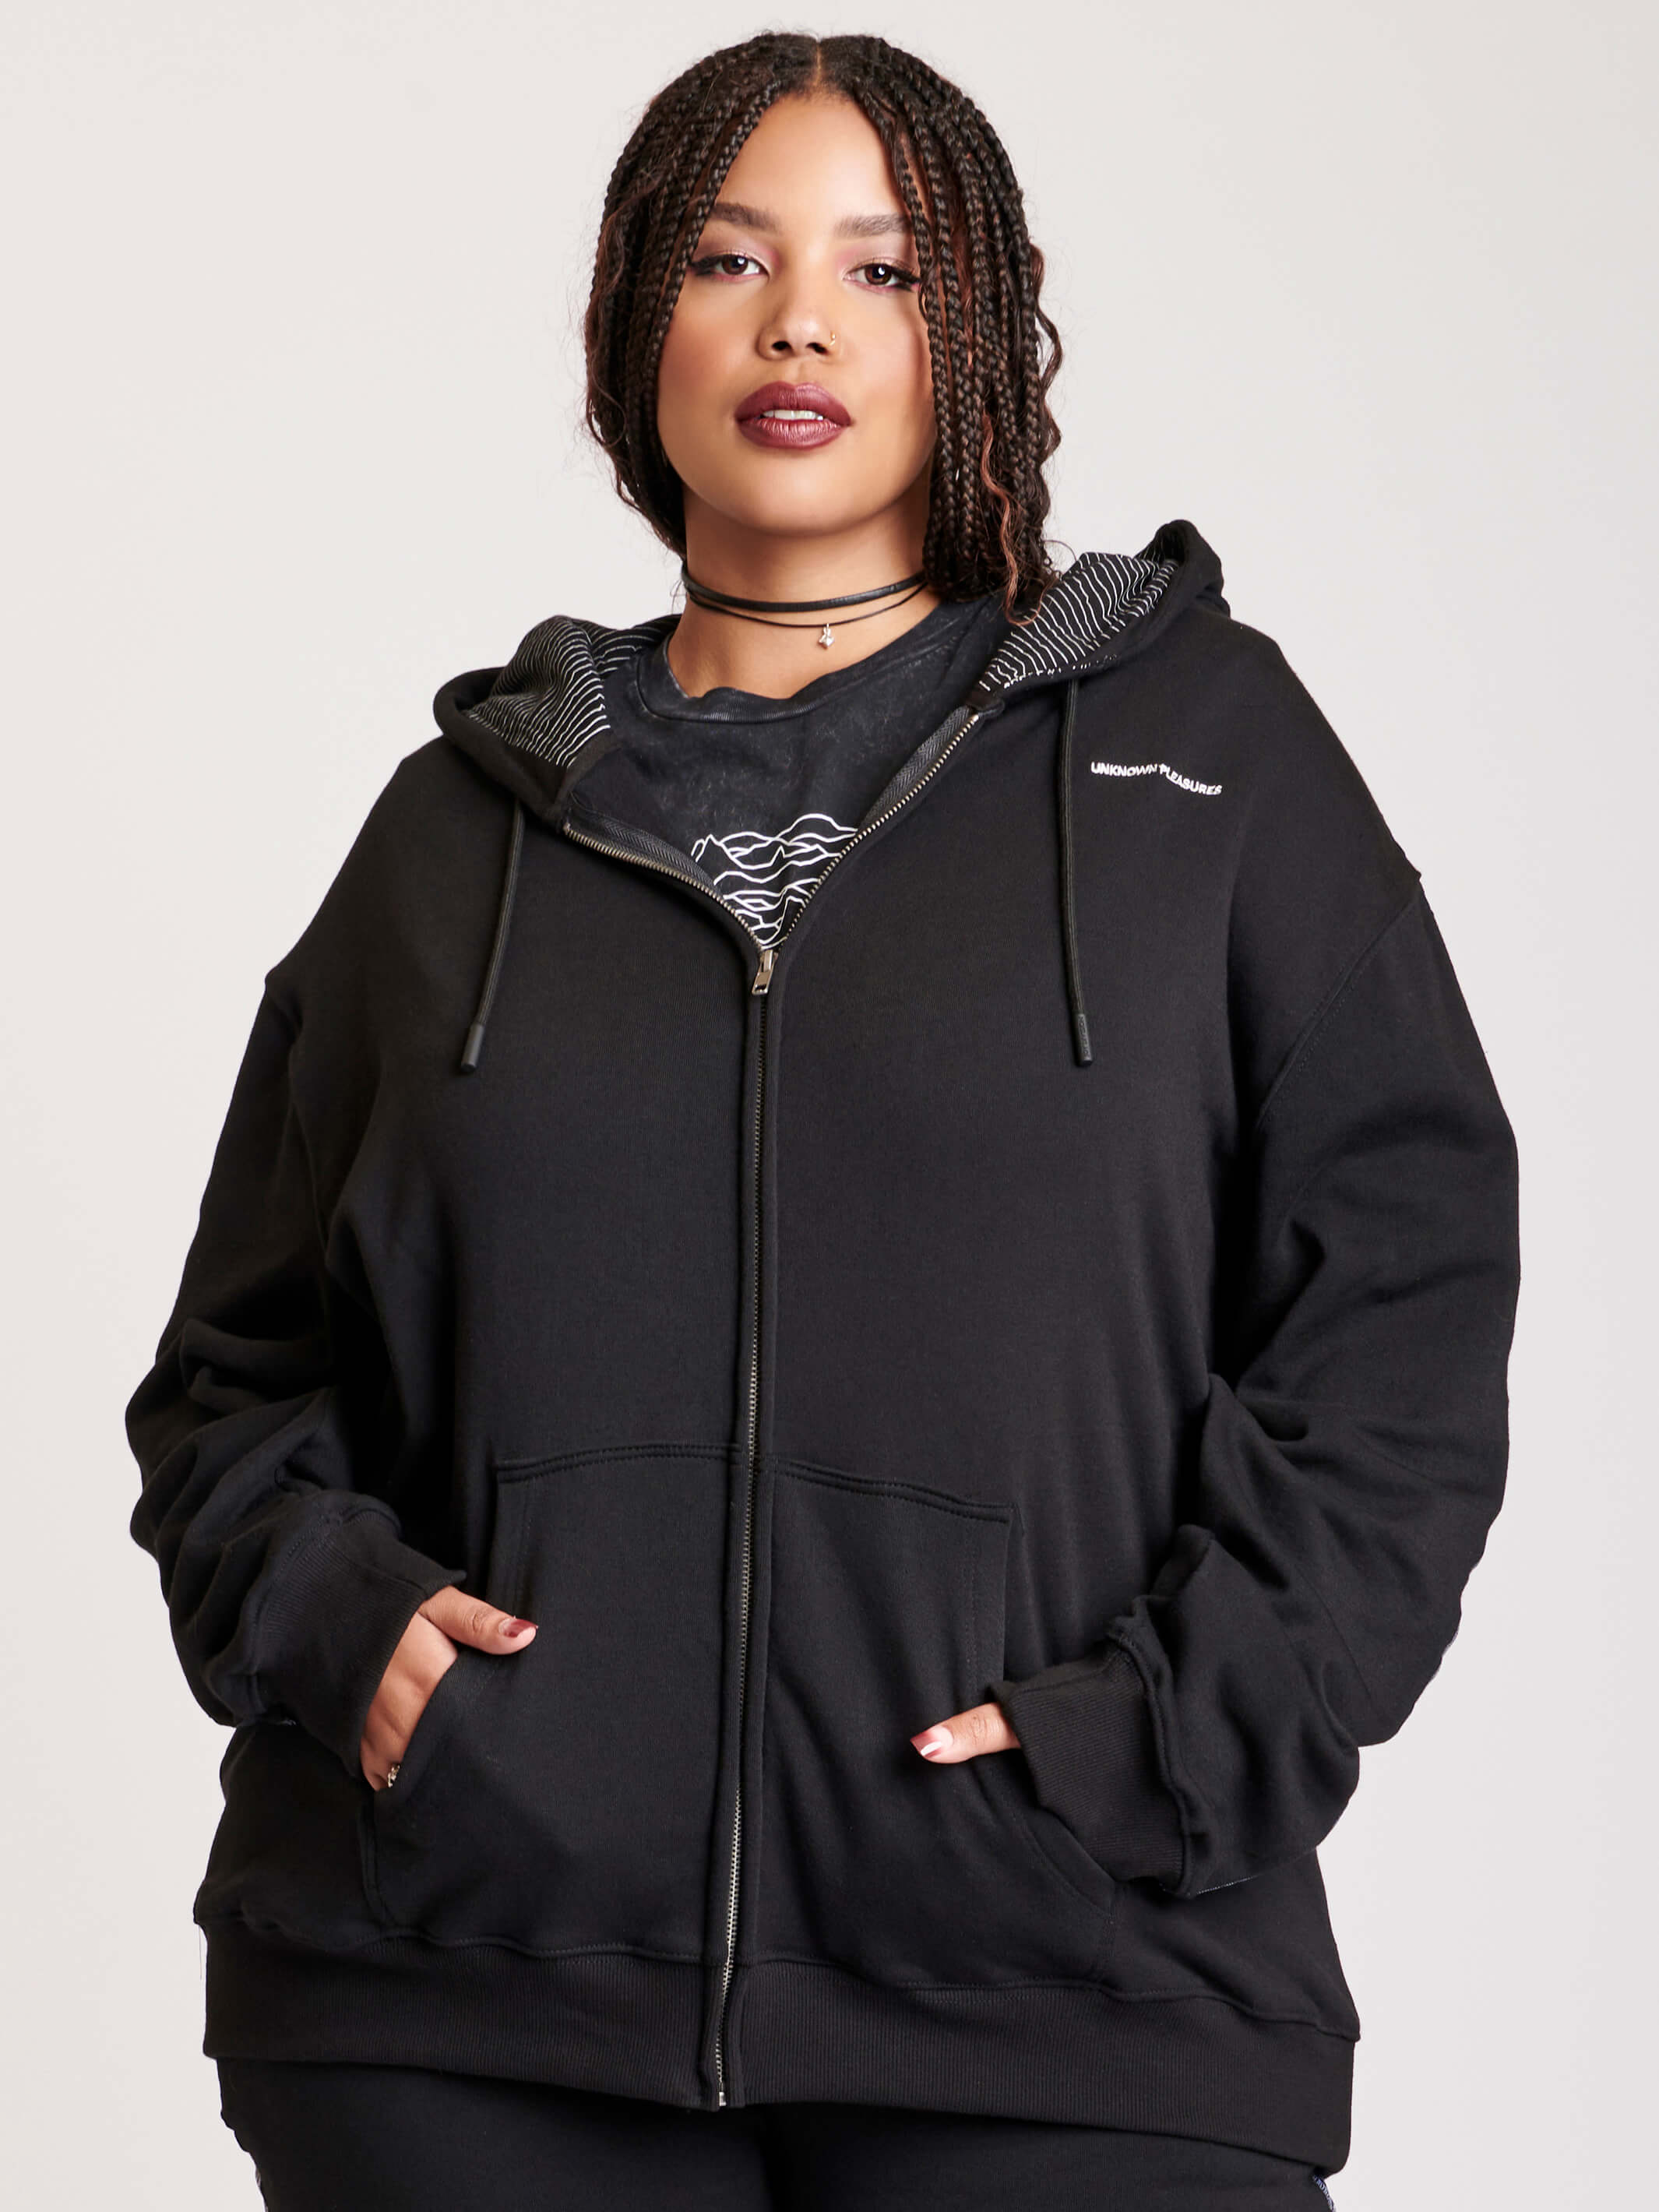 Gothic Black Hoodie, Oversized Hoodie Dress, Hoodies for Women, Plus Size Edgy  Clothing 